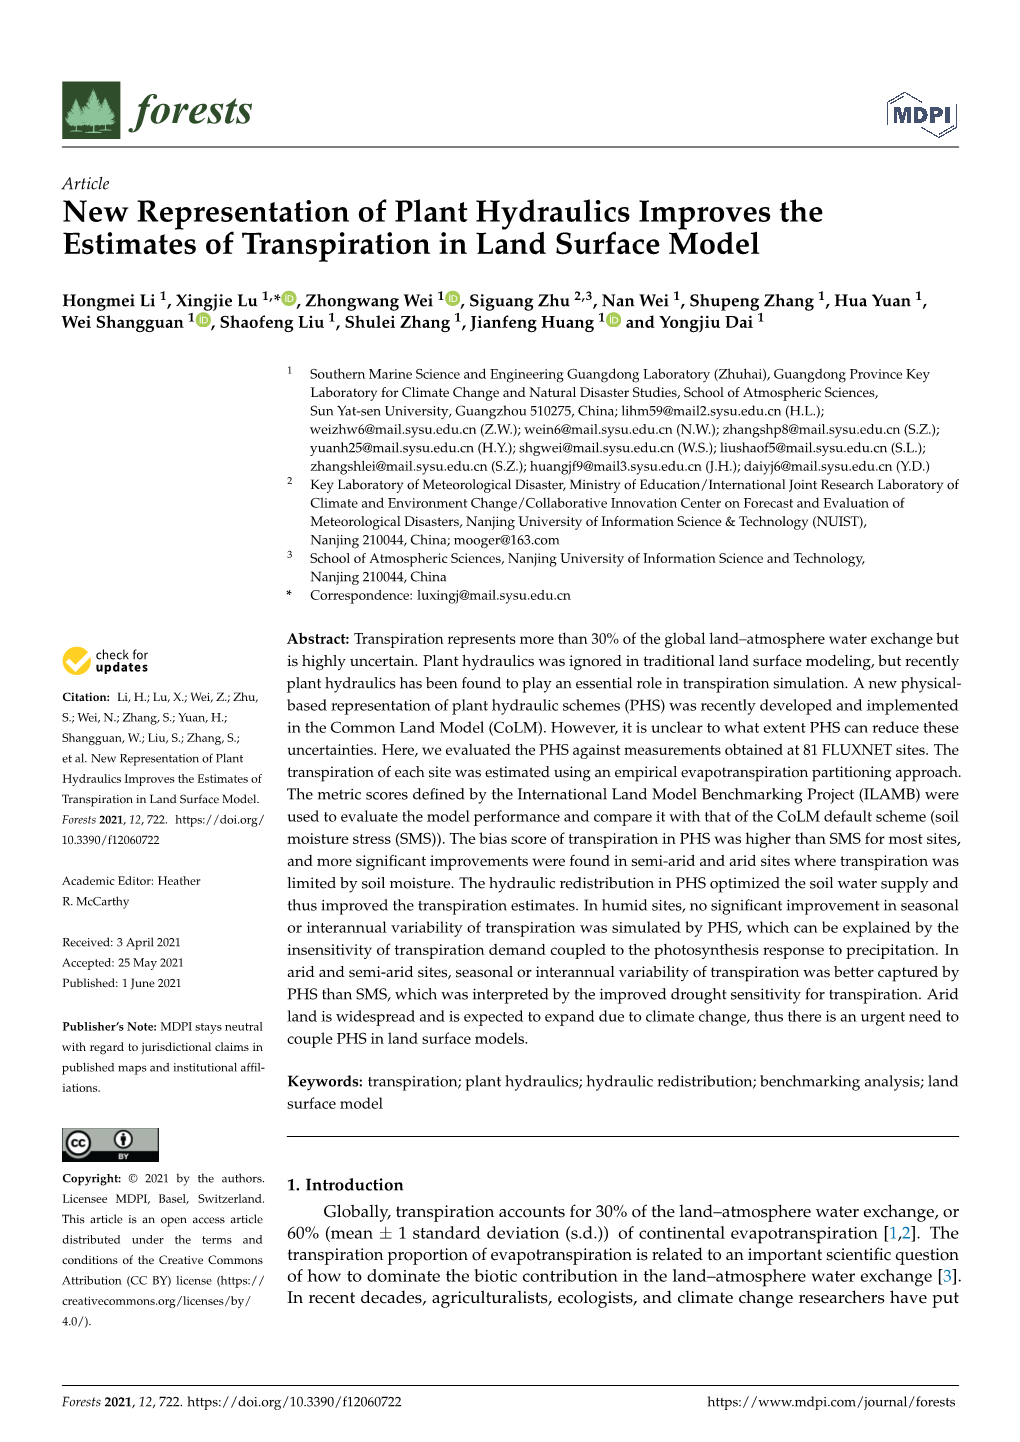 New Representation of Plant Hydraulics Improves the Estimates of Transpiration in Land Surface Model